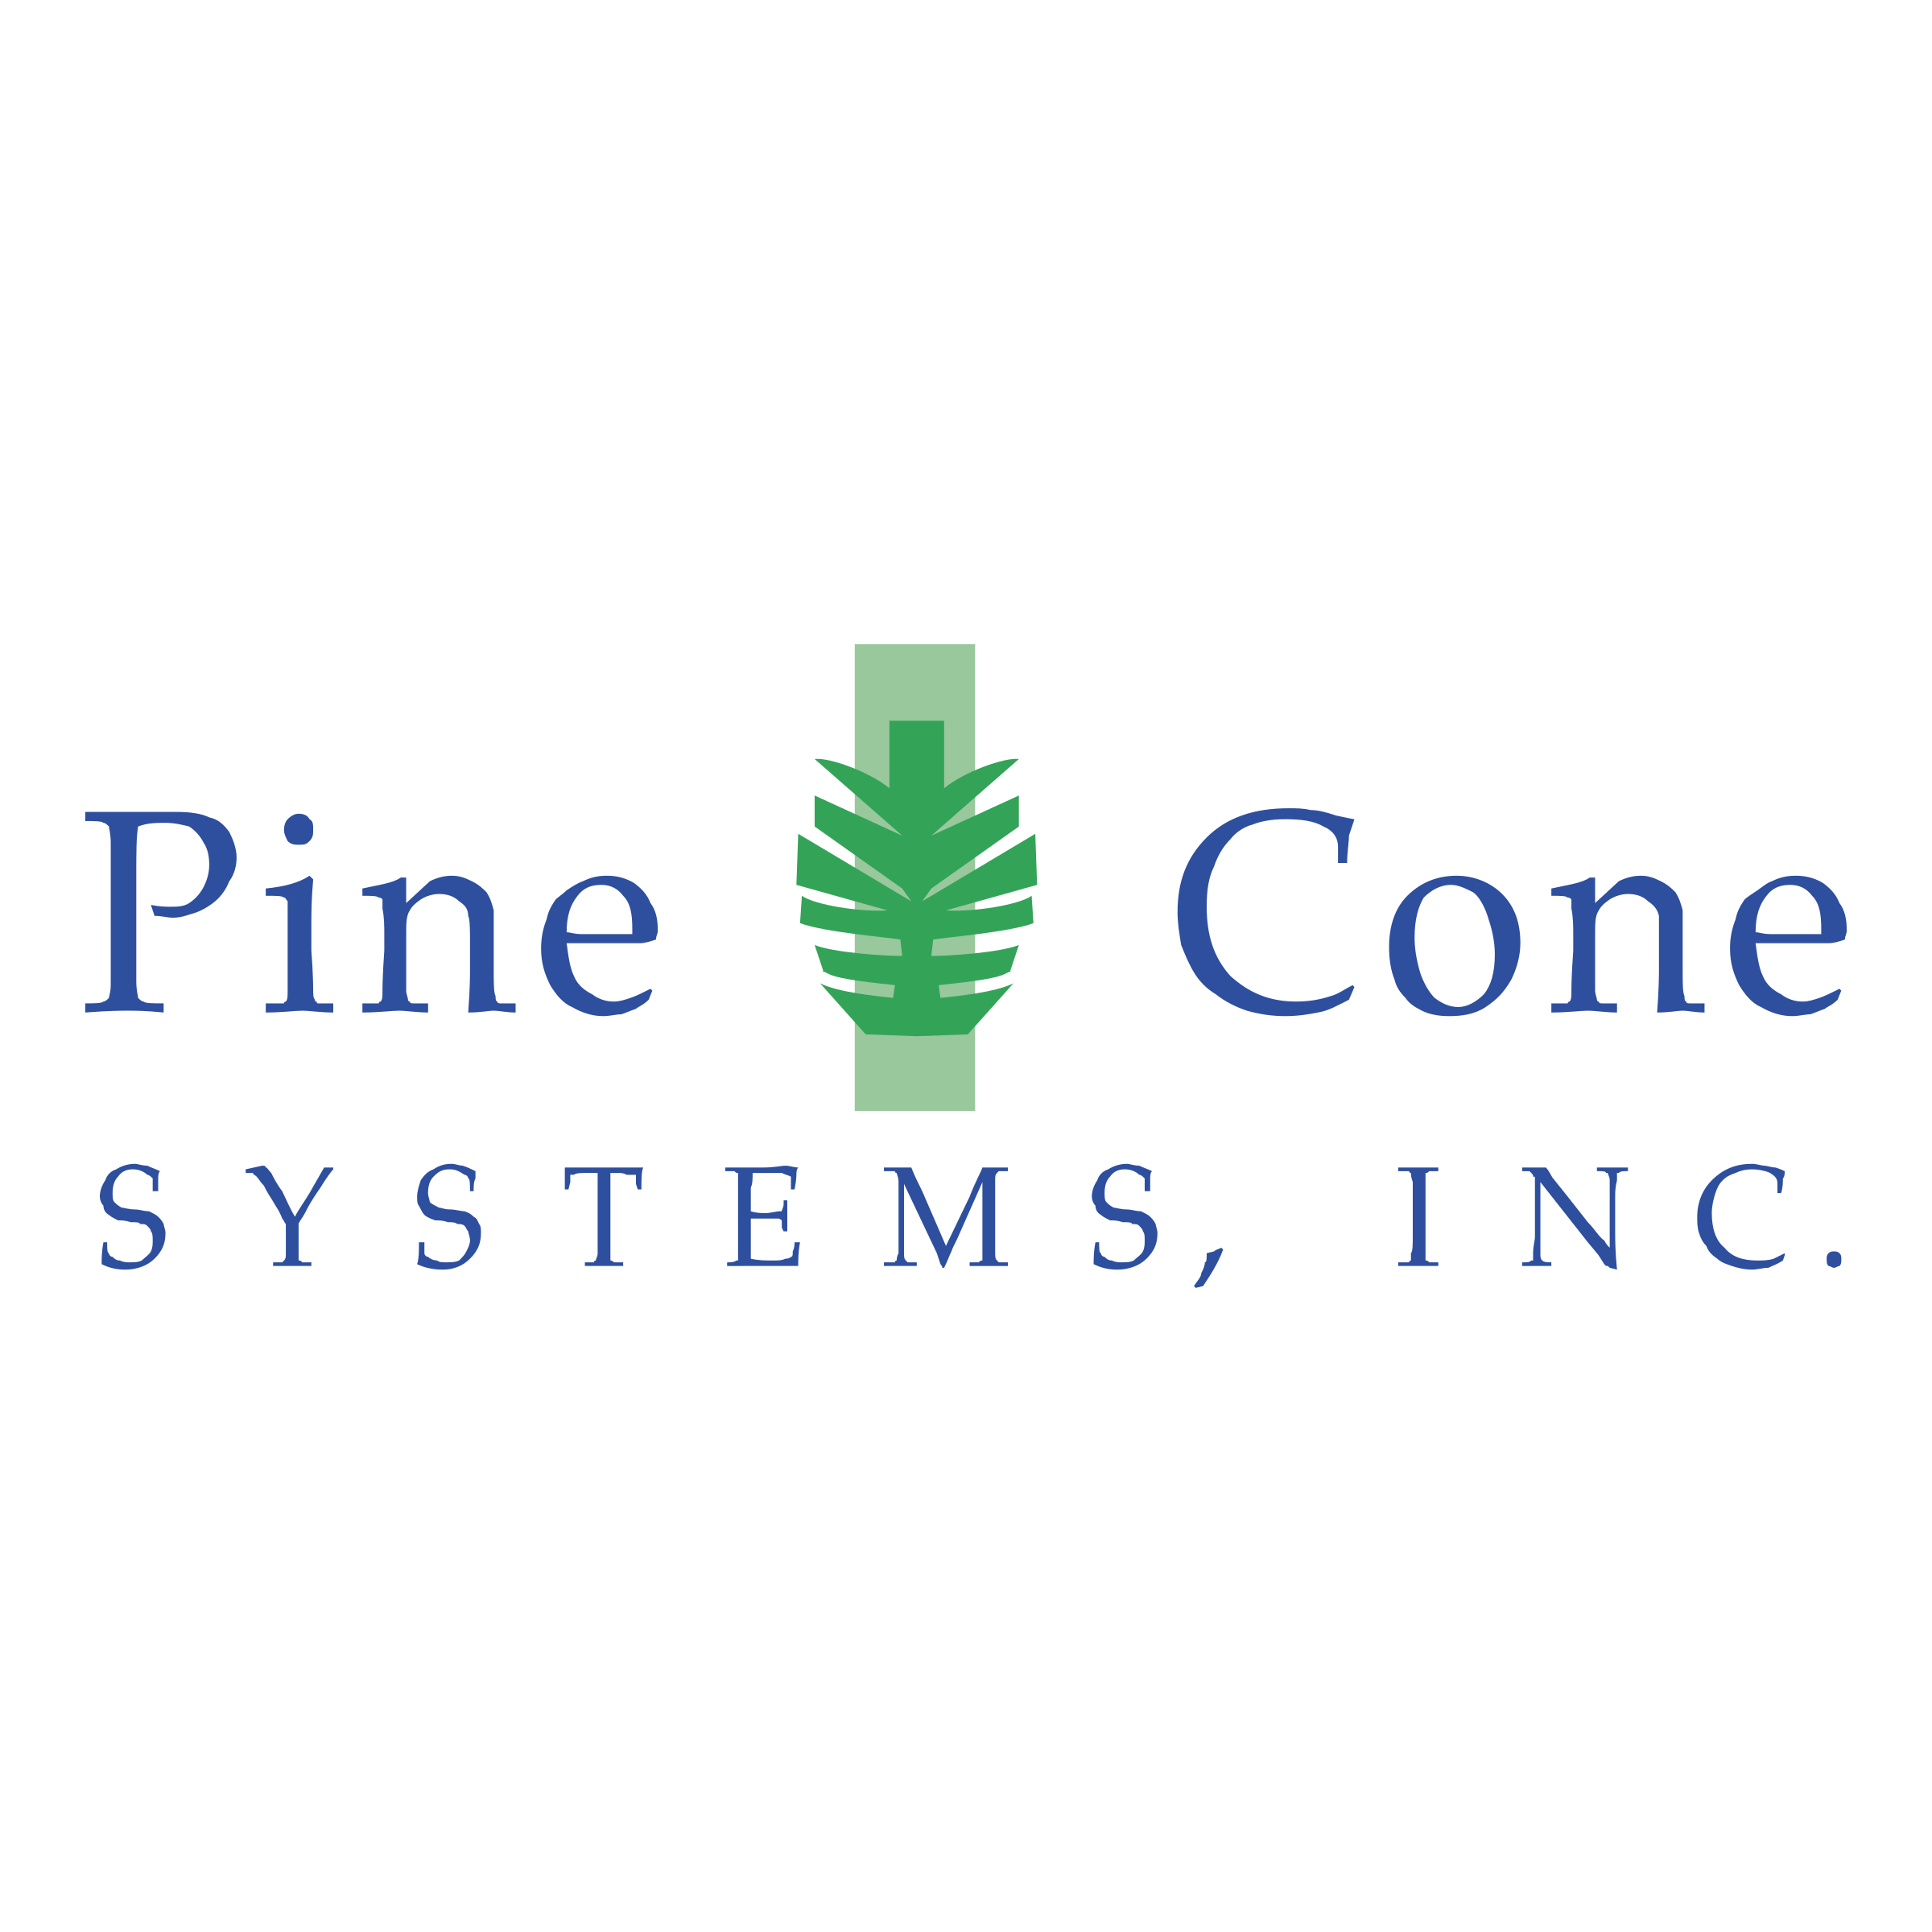 Cone Logo - Pine Cone Systems Logo PNG Transparent & SVG Vector